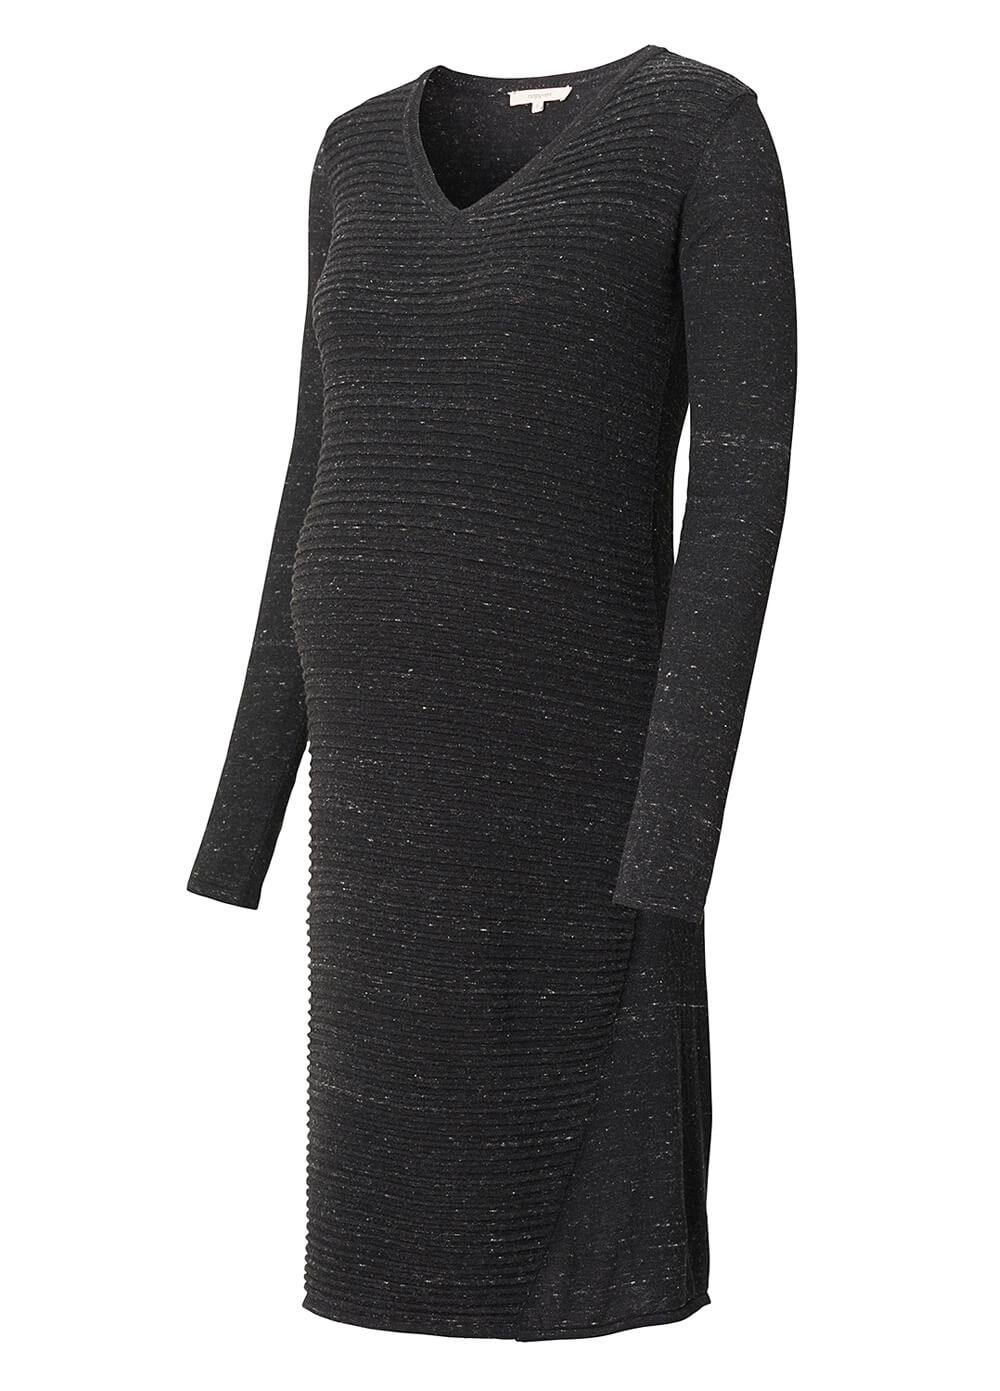 Helen Ribbed Knit Maternity Dress by Noppies